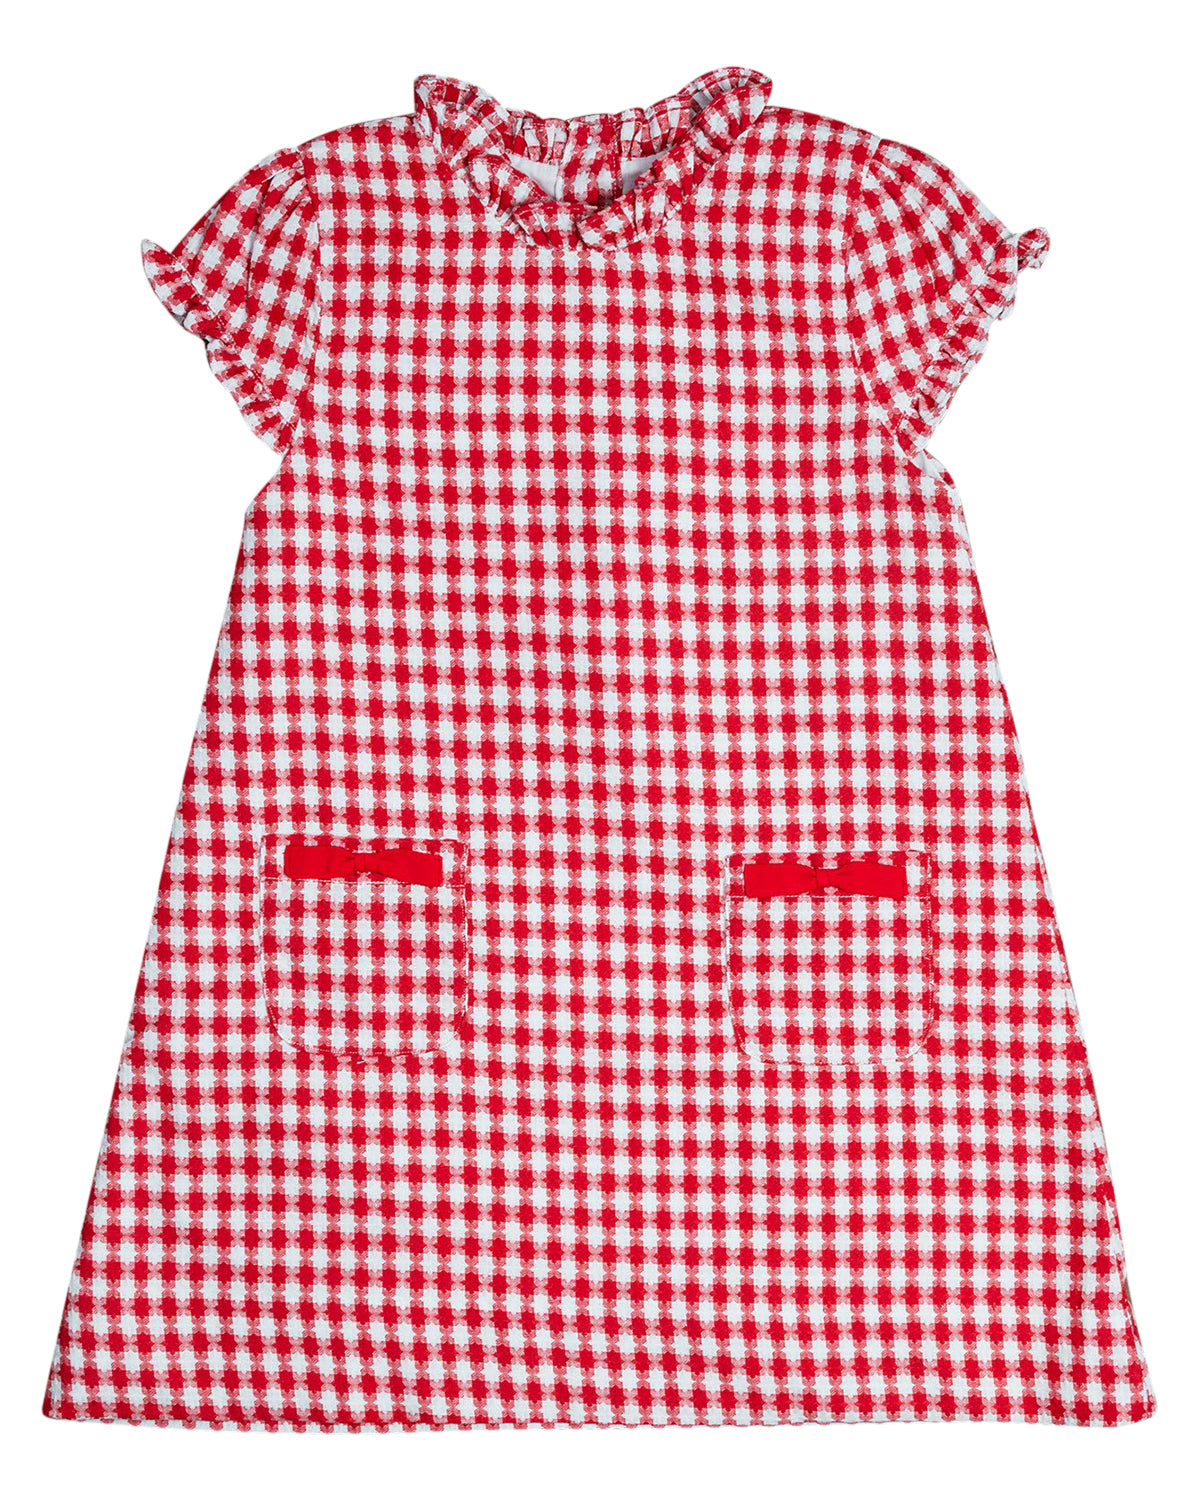 Red and White Jacquard A-Line Dress- FINAL SALE